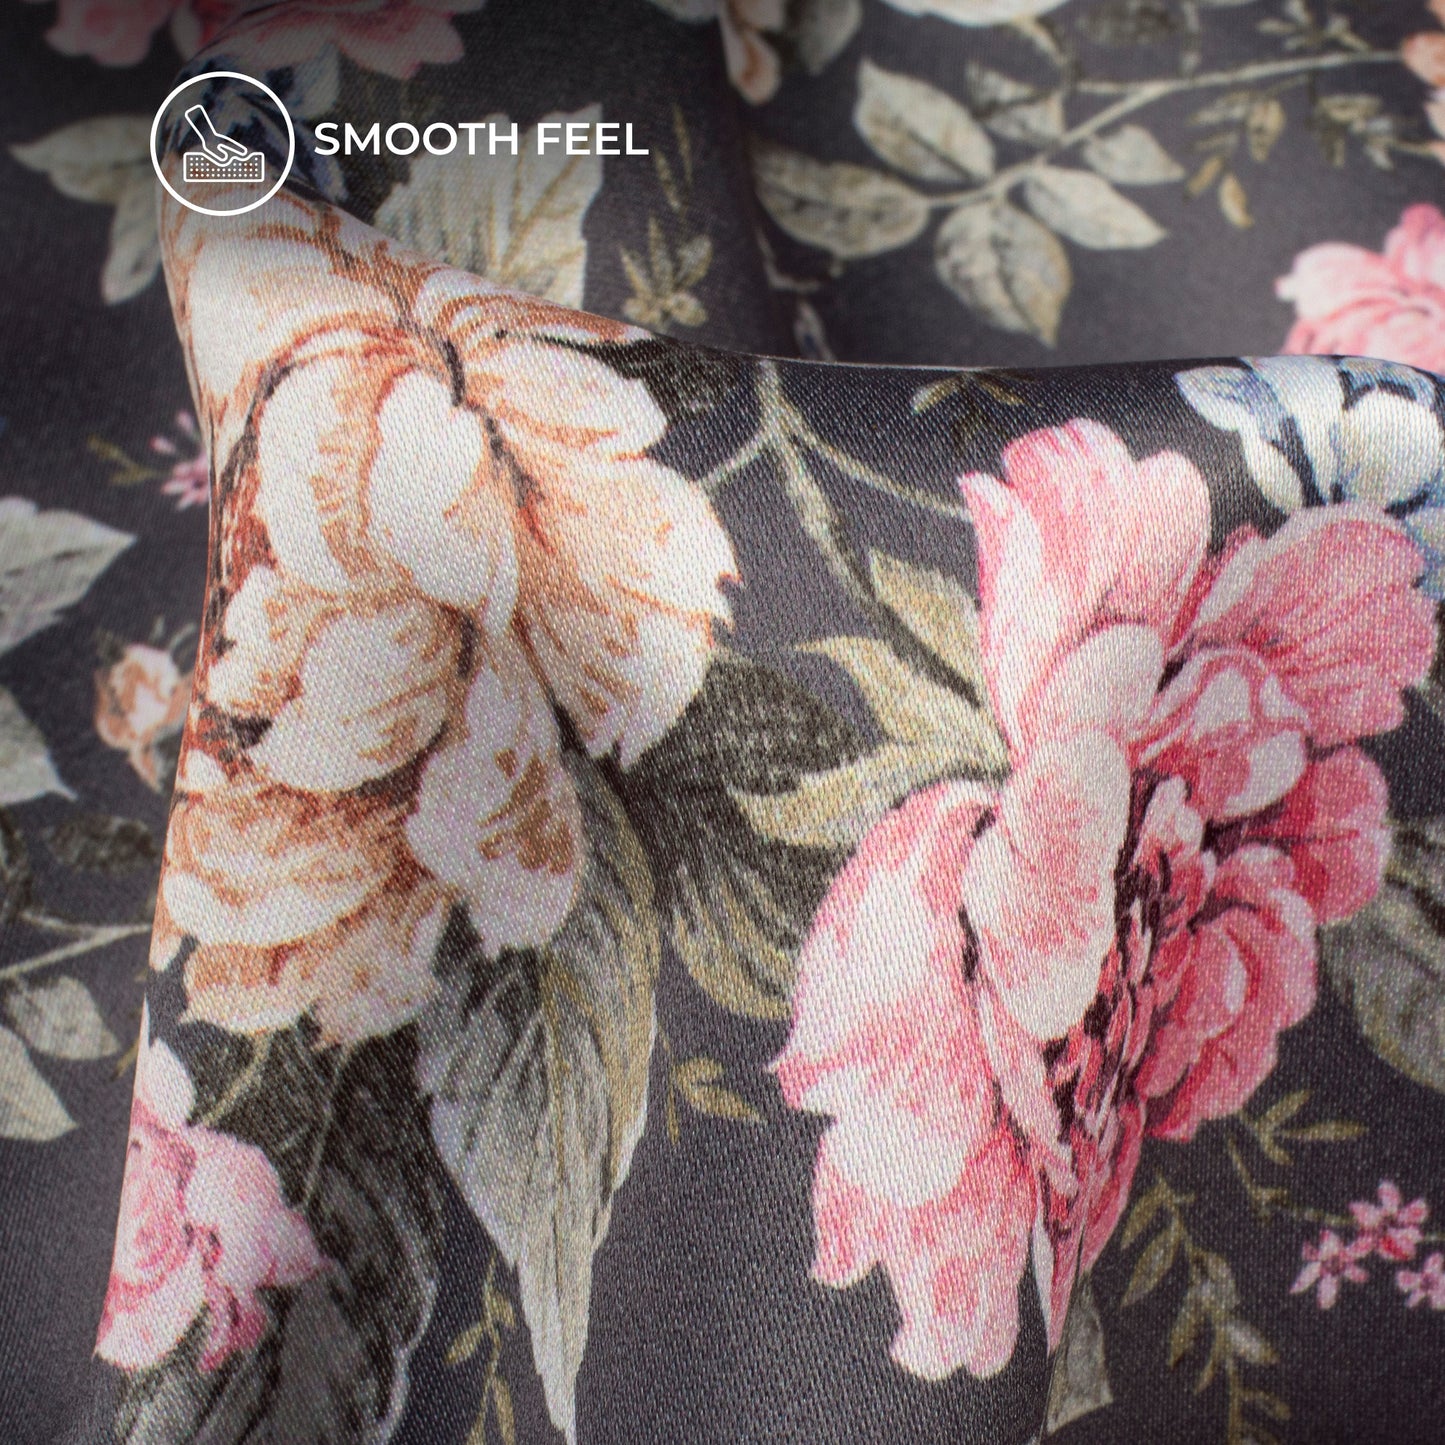 Pewter Grey Floral Digital Print Charmeuse Satin Fabric (Width 58 Inches)